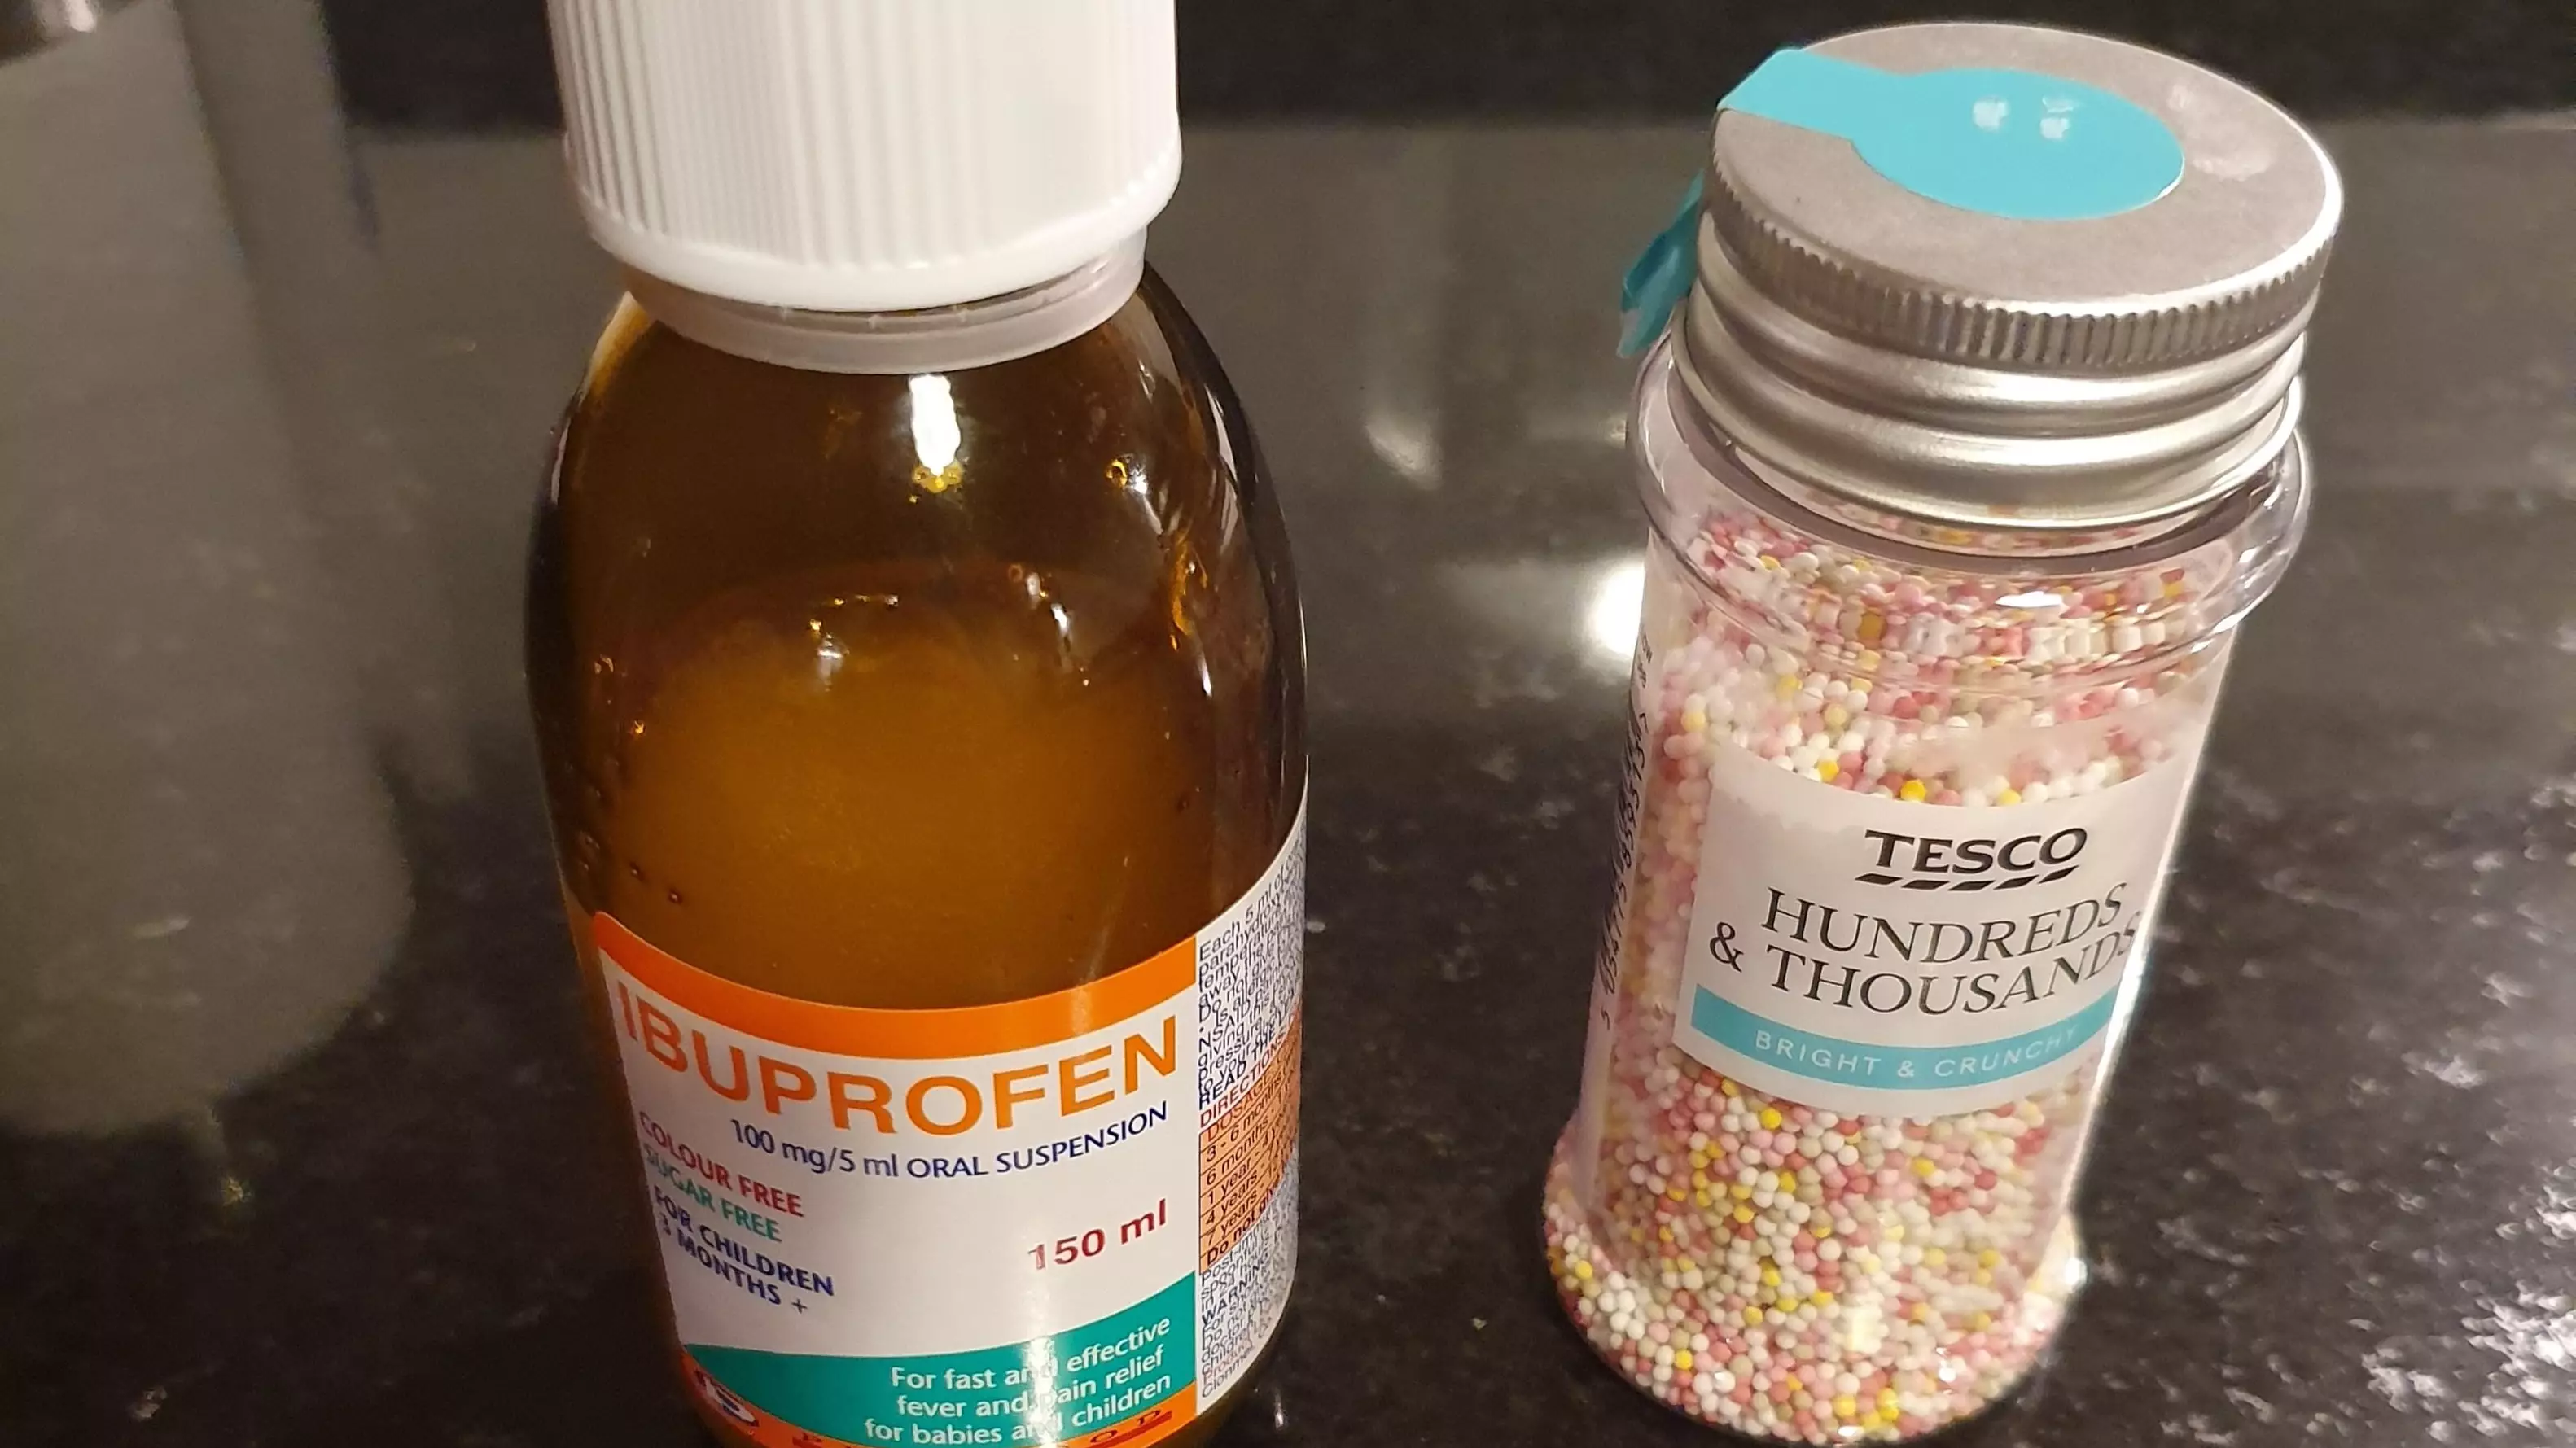 Woman Reveals 'Hack Of The Century' By Transforming Kids' Medicine Into 'Unicorn Potion'